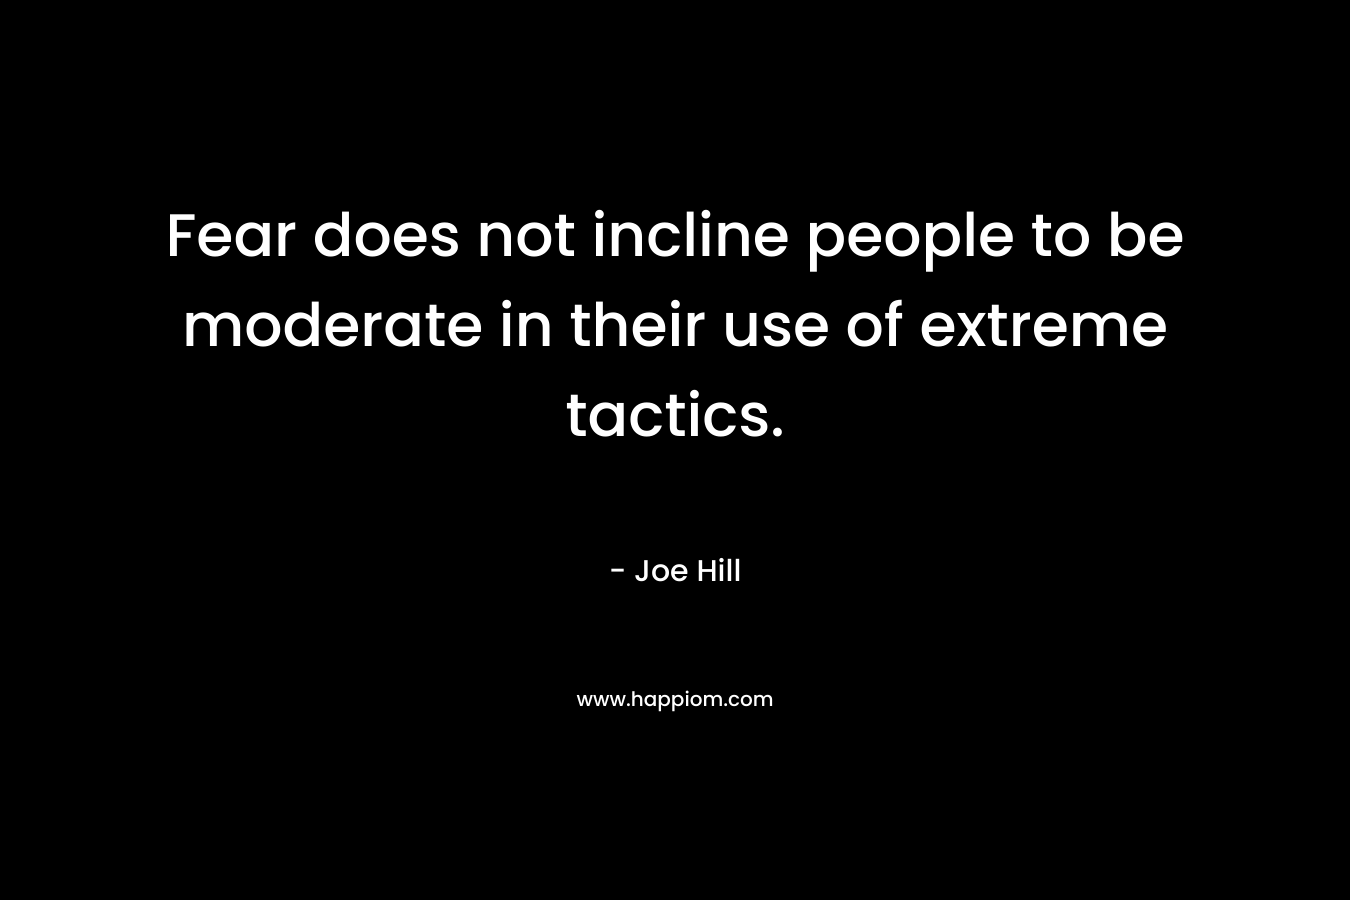 Fear does not incline people to be moderate in their use of extreme tactics. – Joe Hill